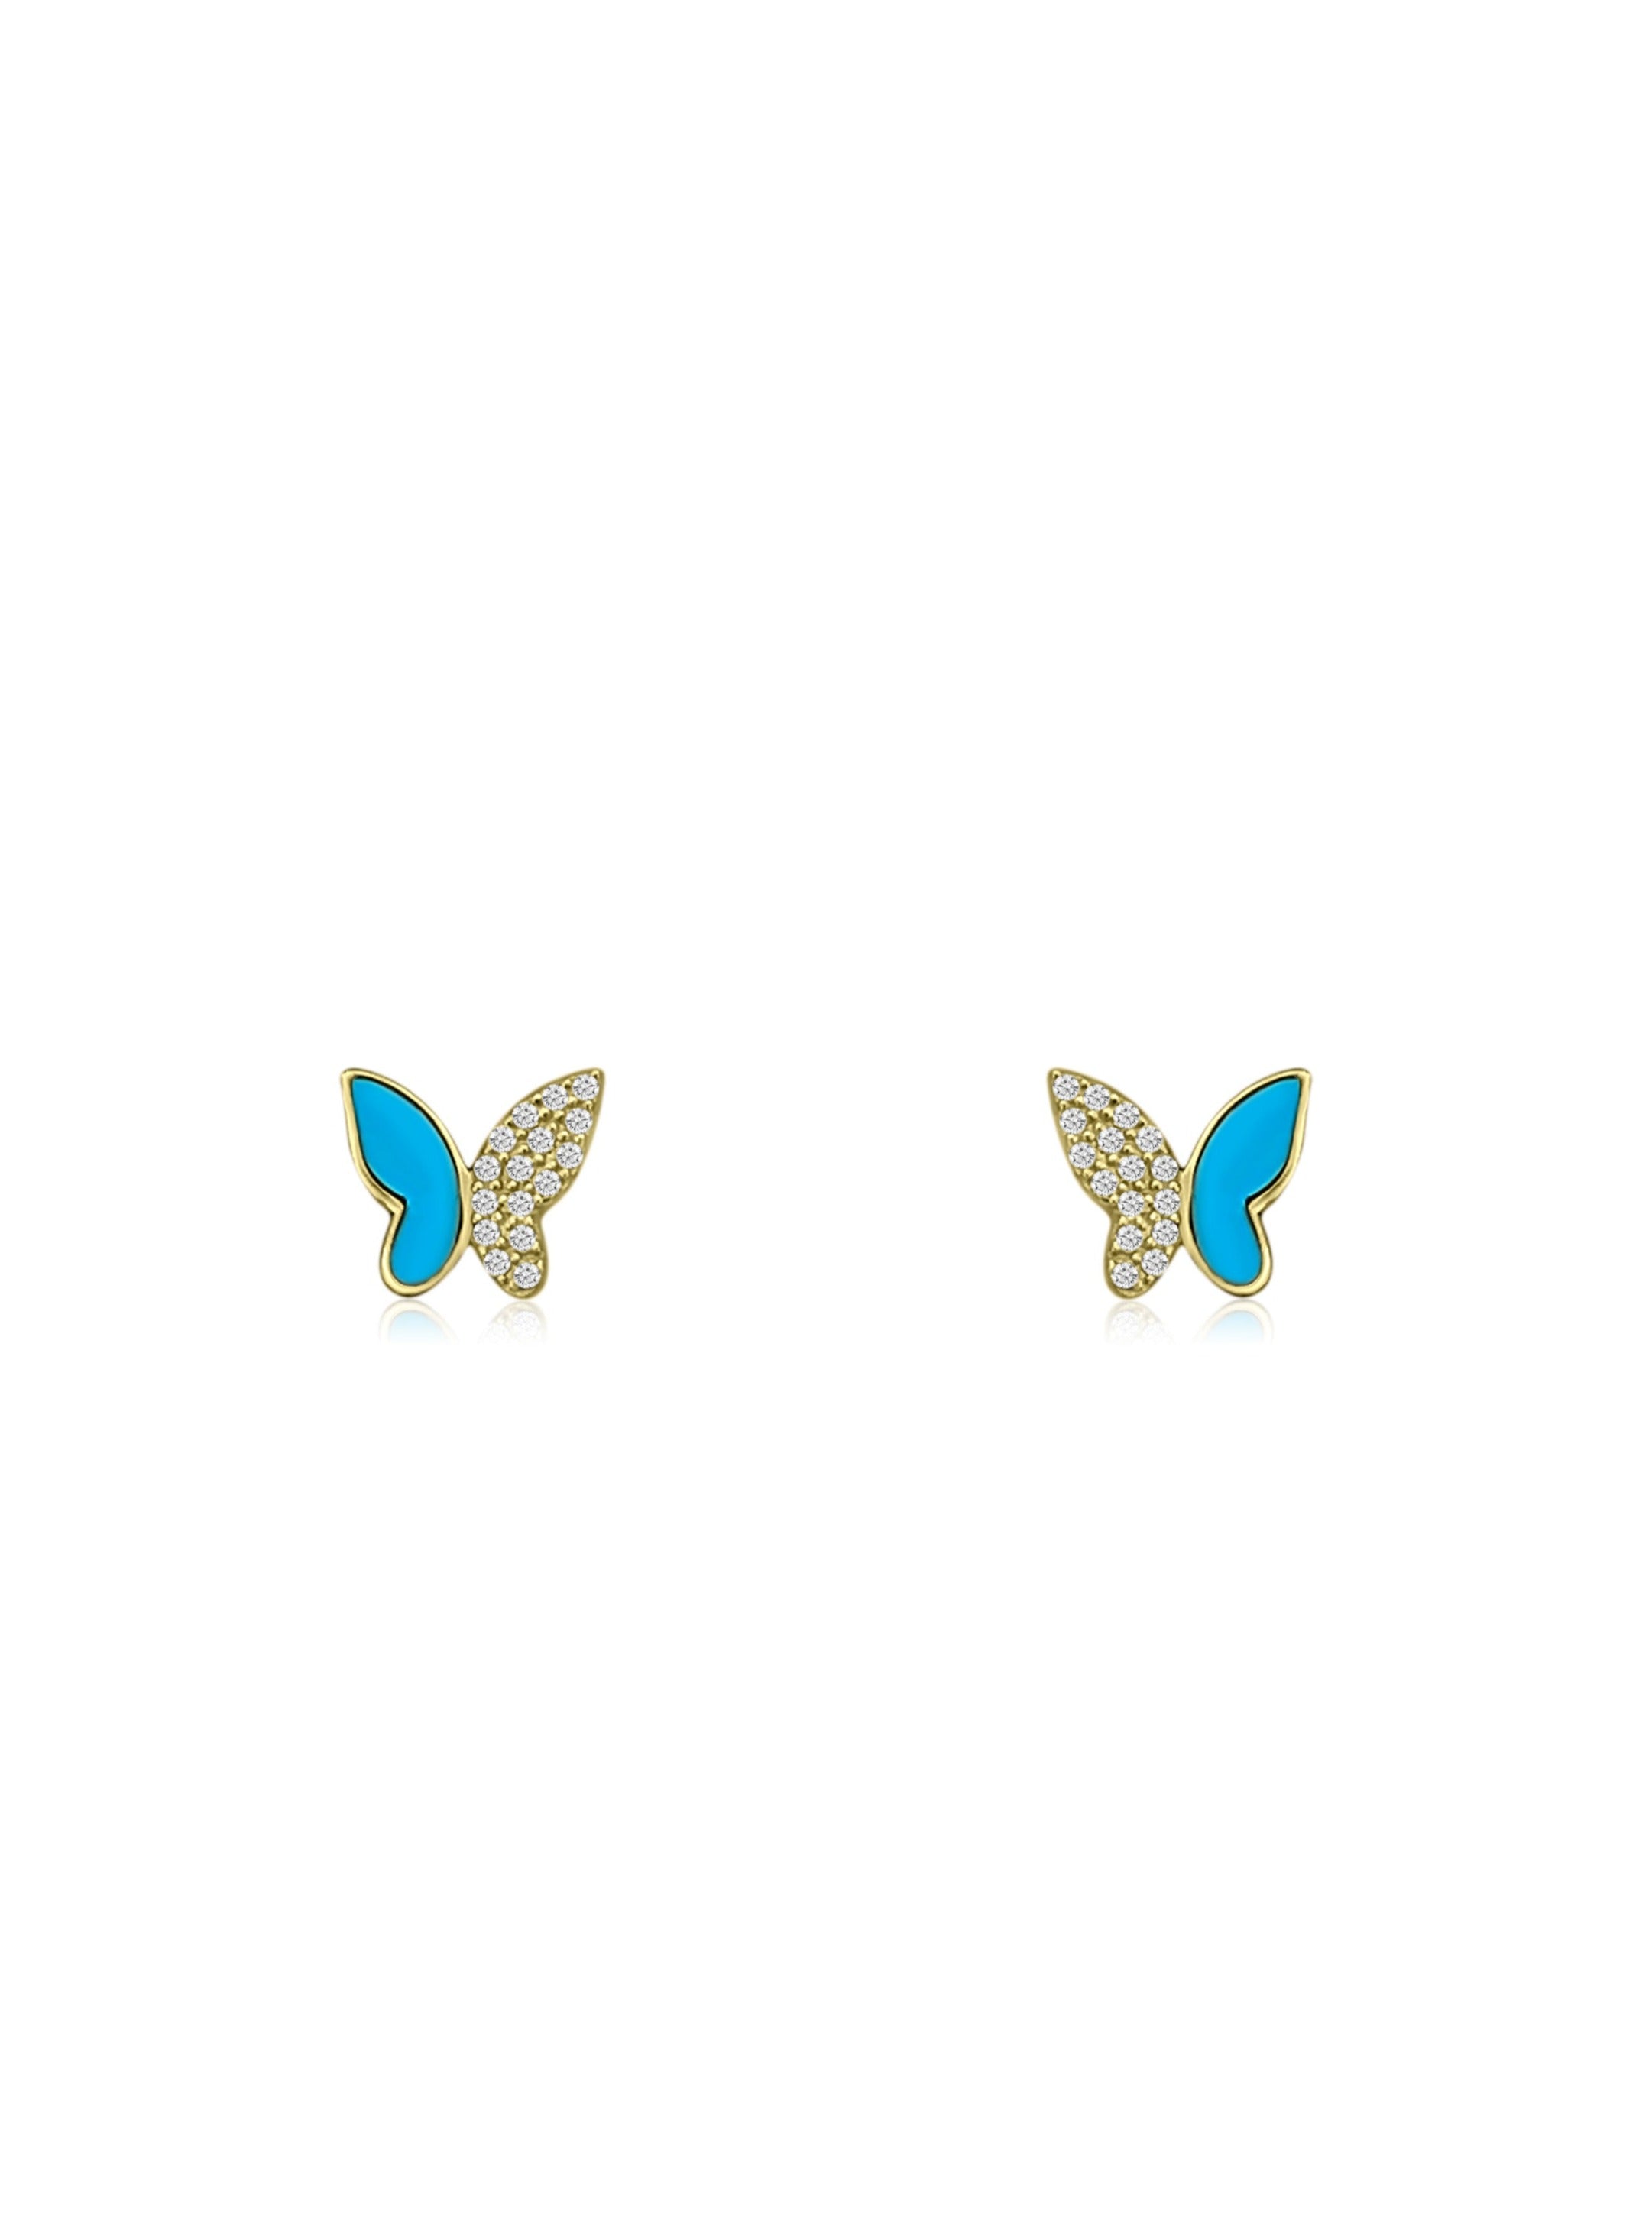 Hypoallergenic Sterling Silver Pink & Blue Butterfly Stud Earrings for Kids  (Nickel Free) - Penny and Piper